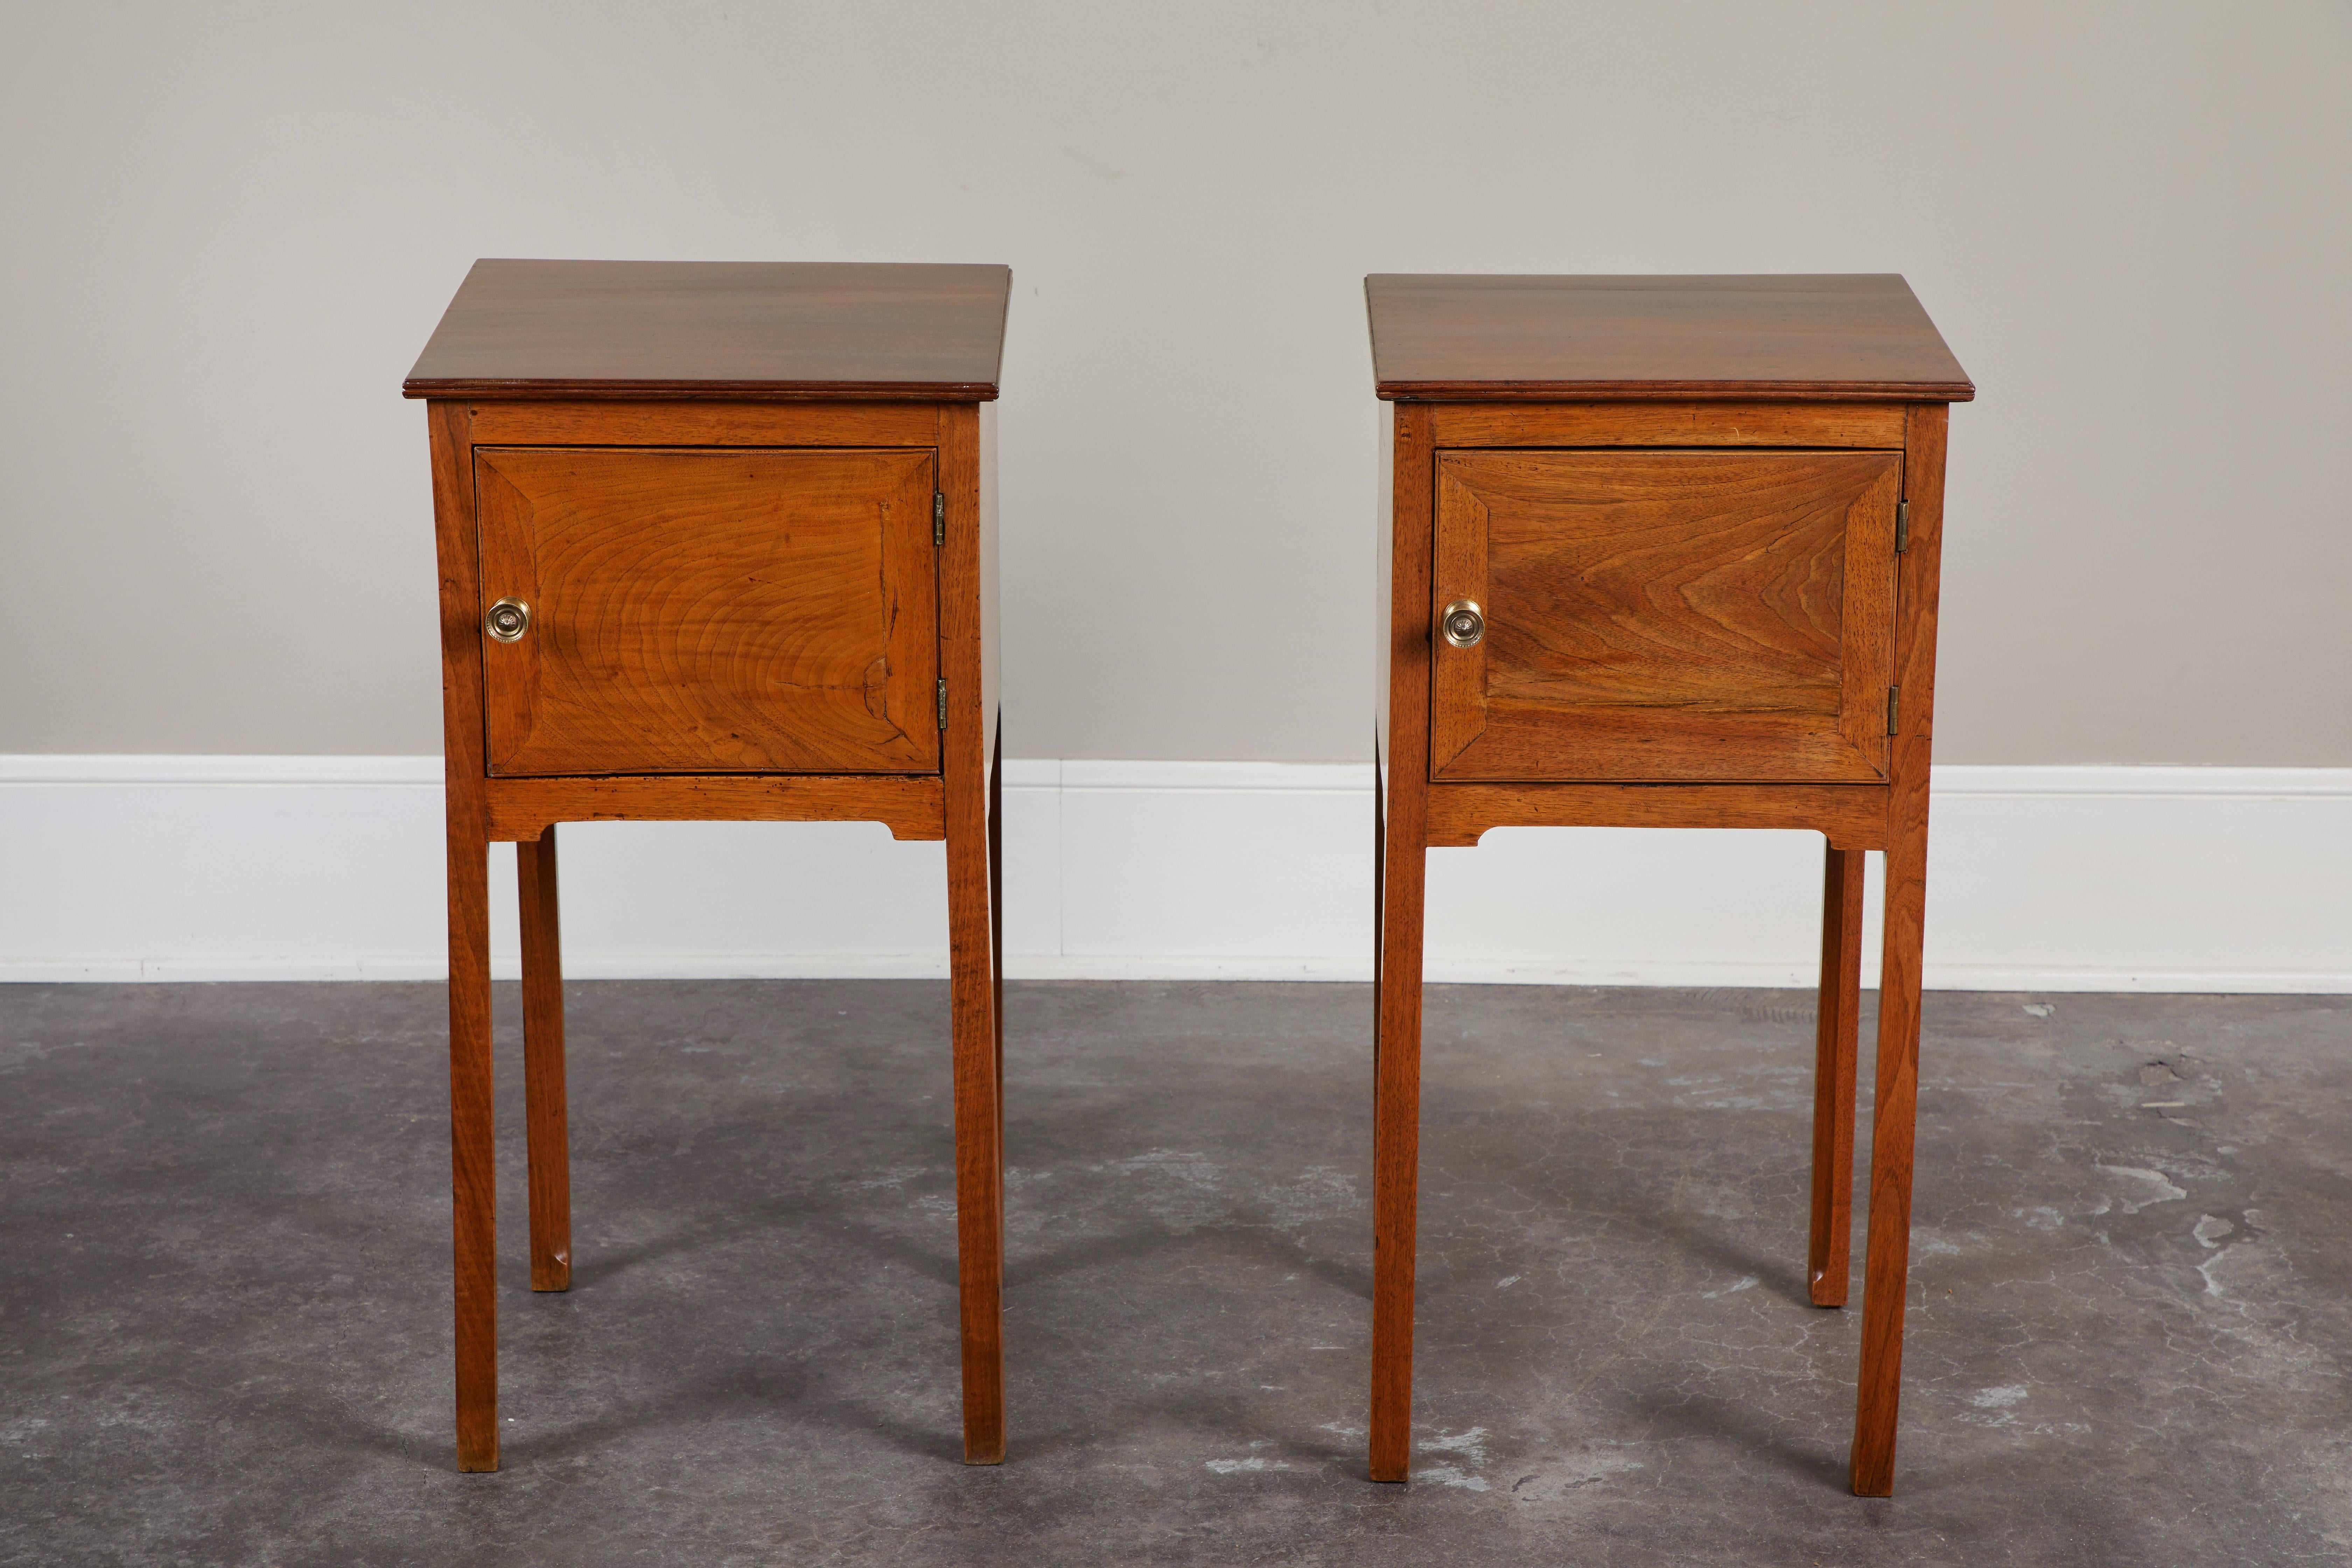 A pair of early 19th century George III English walnut side tables with front single door.  Simple, square shape compliments most design aesthetics, and a handsome pair makes it easy to decorate in nearly any room.